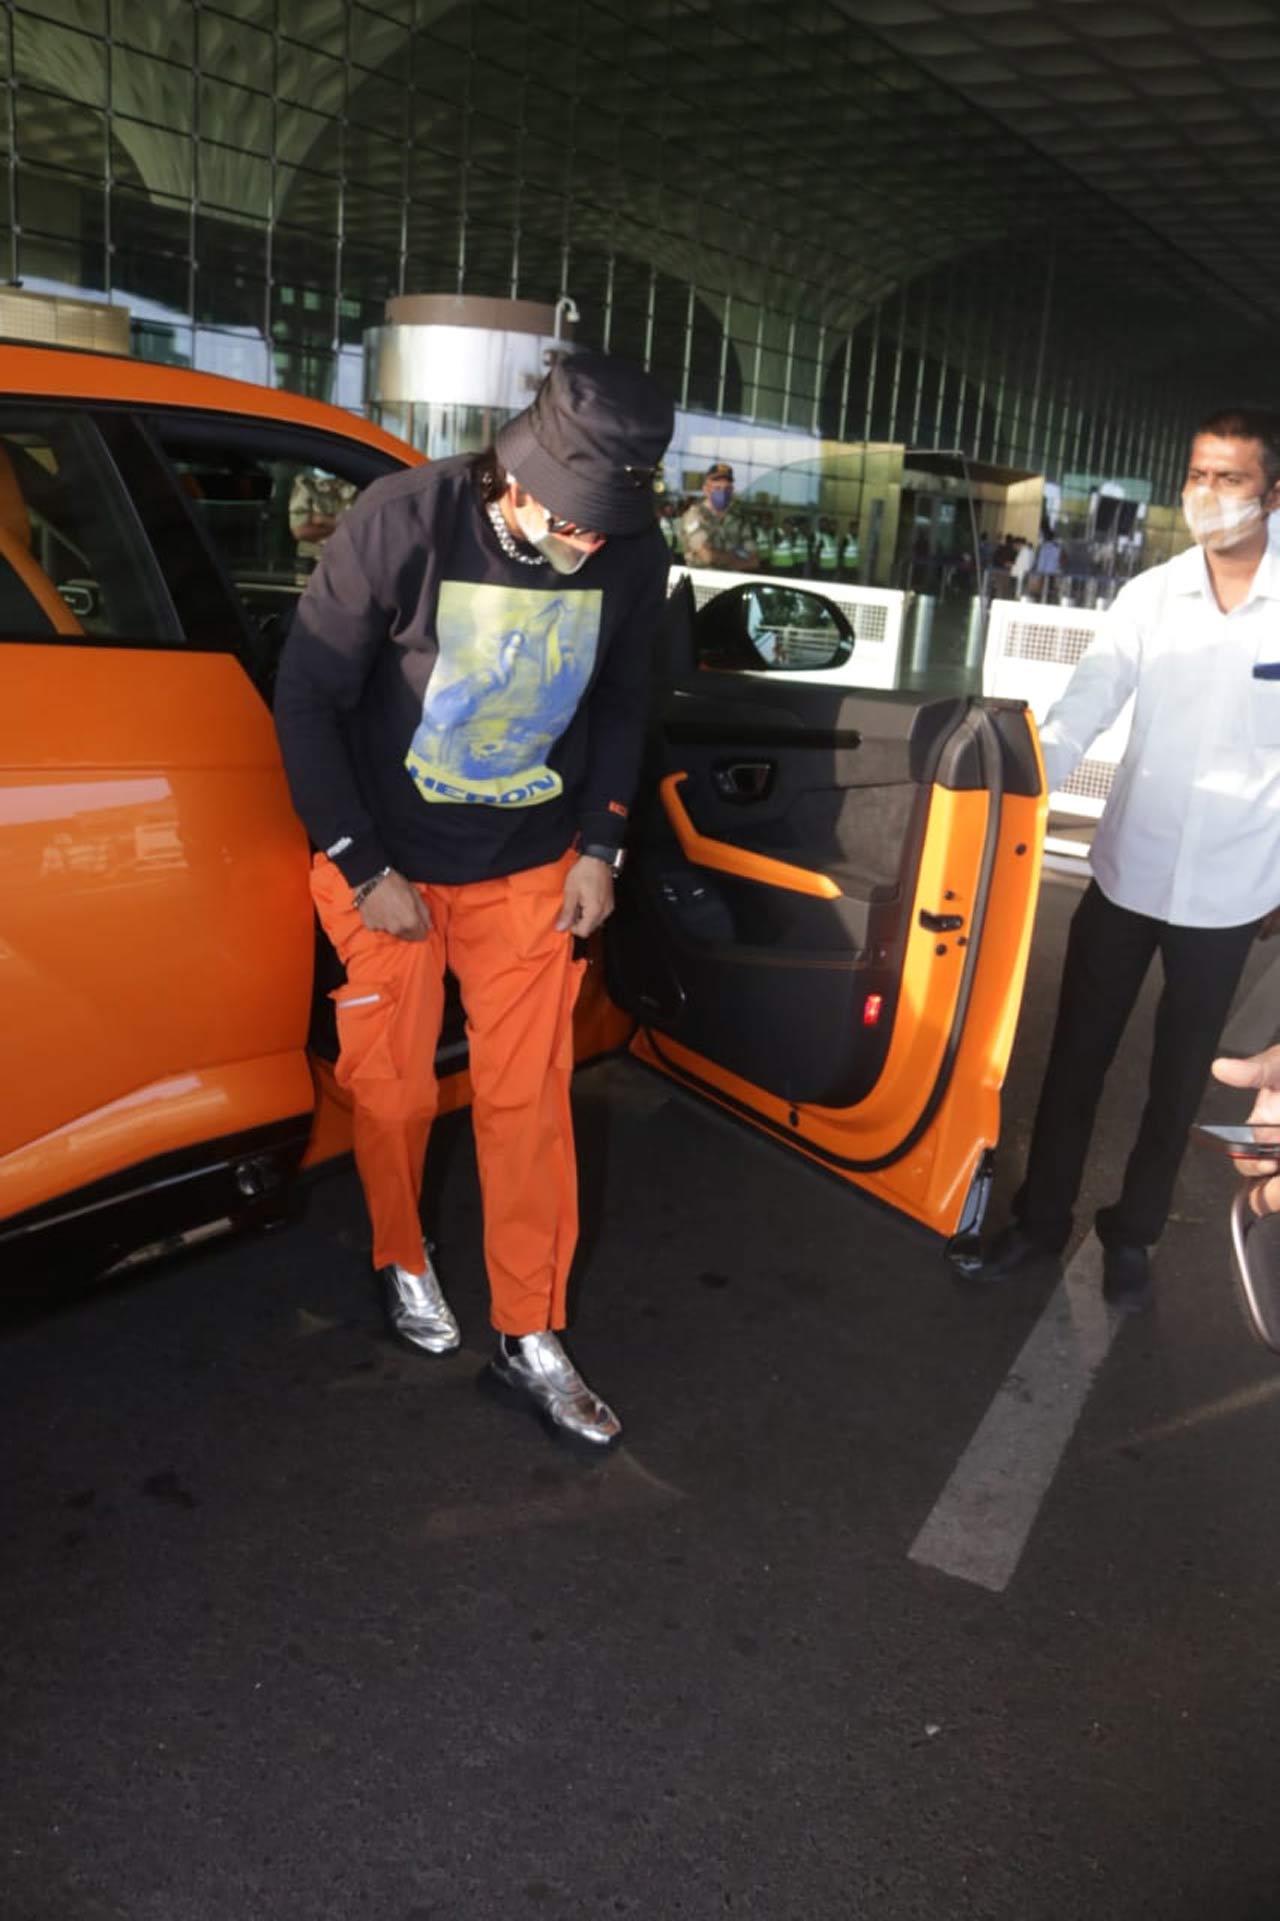 The actor complemented his customised orange Lamborghini with his 'whacky' fashion sense, which has taken the internet by storm. His last airport look, which highlighted two ponytails, was also a hit airport outing on social media.